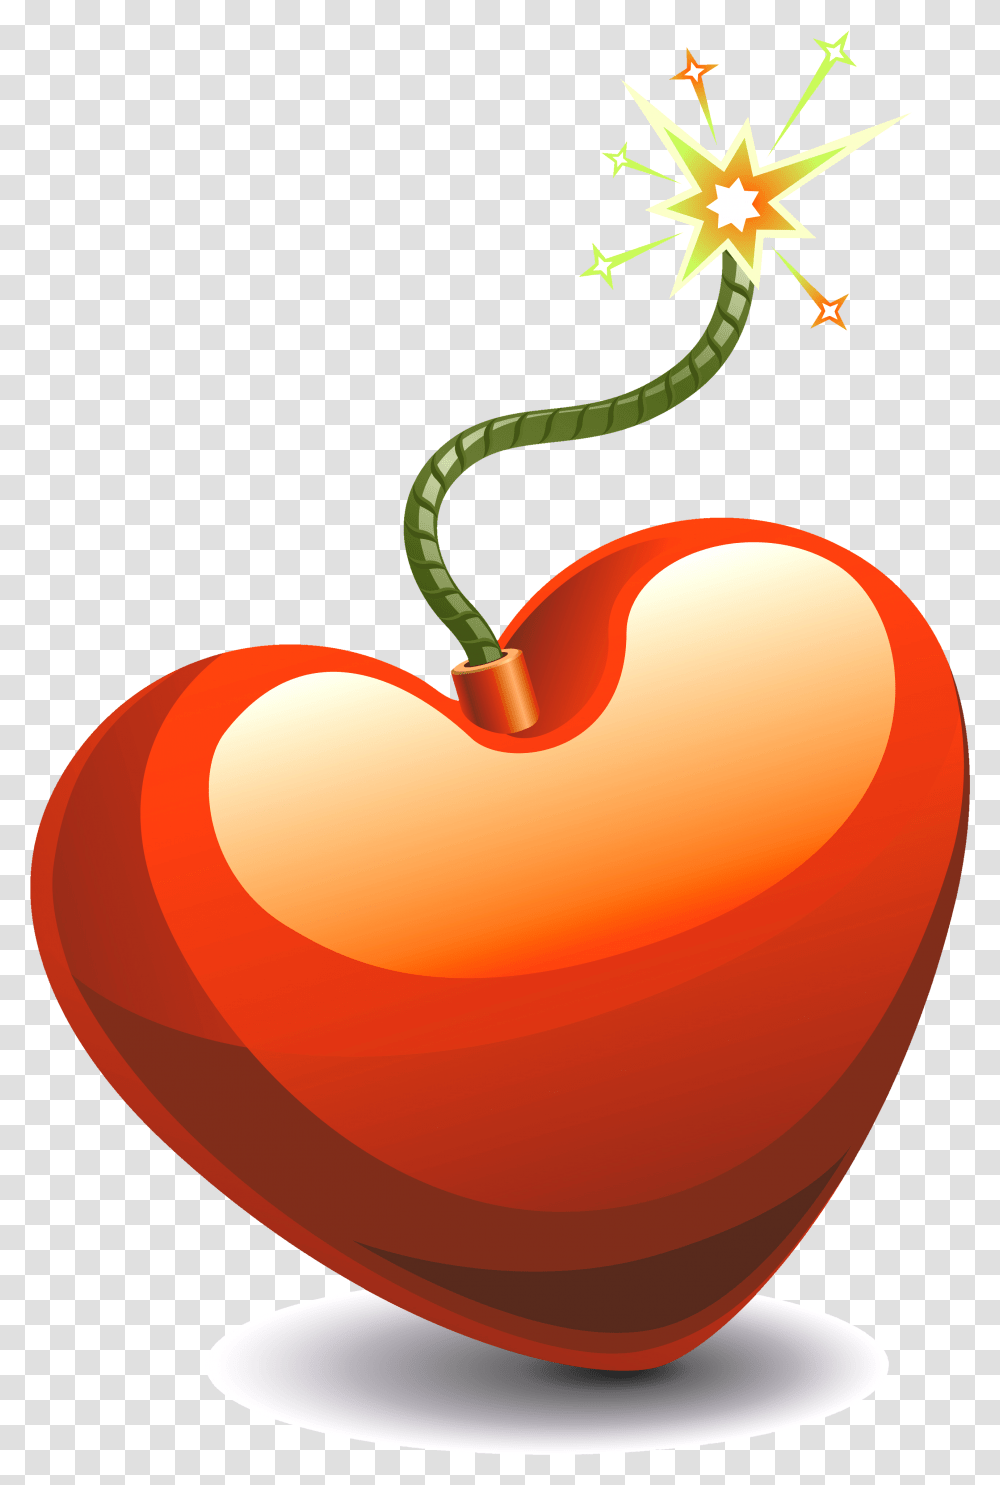 Heart Bomb Hires Copy Heart Bomb Clipart Download Bomb With Heart Clipart, Plant, Fruit, Food, Vegetable Transparent Png